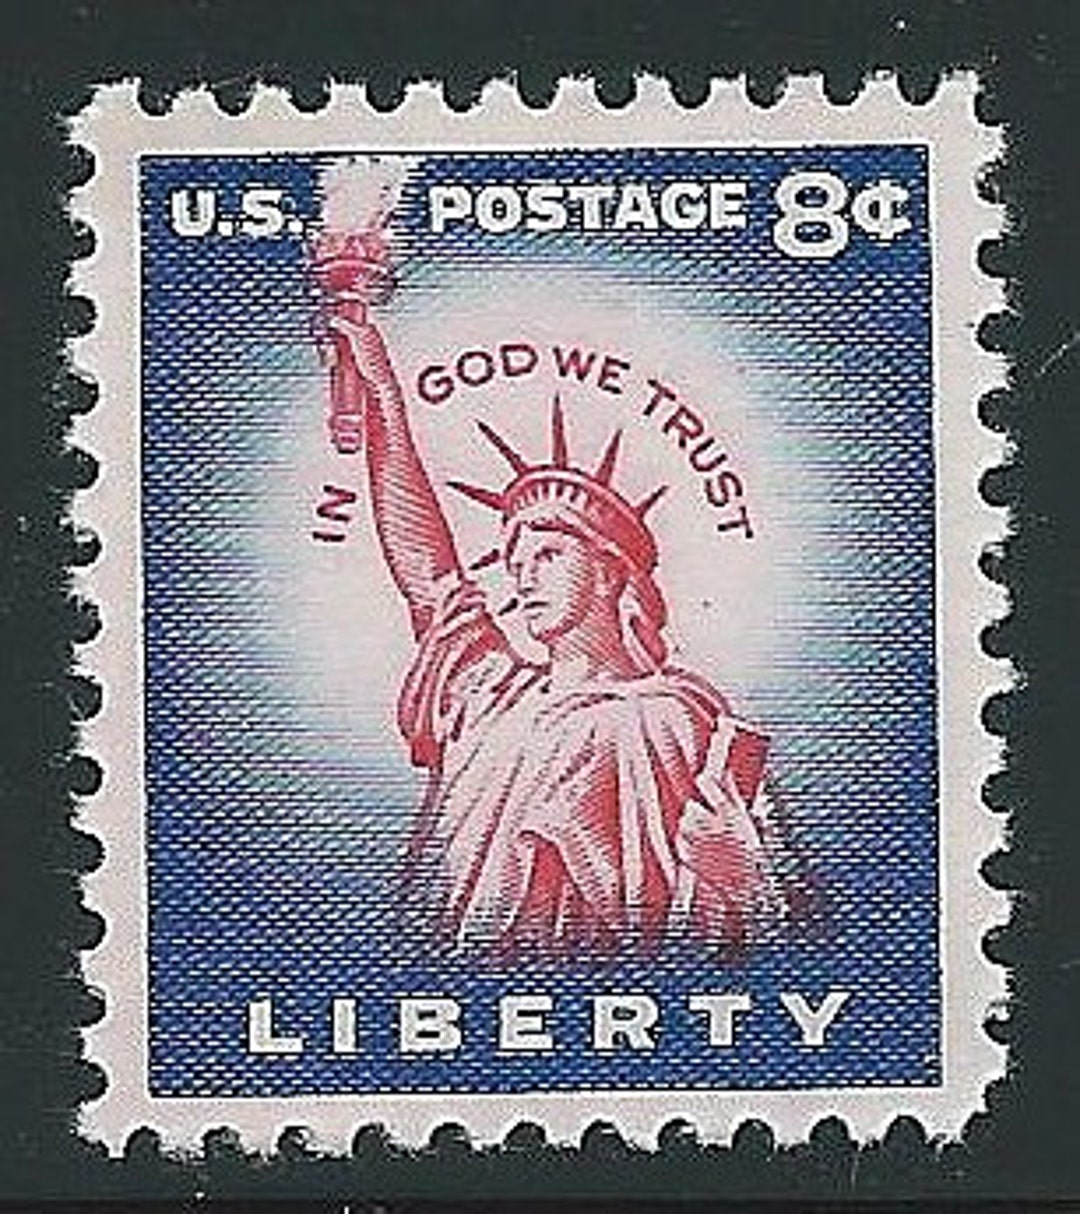 Pack of 20 .. 8 Cent Statue of Liberty Stamp Issued 1956 .. Vintage Unused  US Postage Stamp .. New York City Landmark Staten Island 